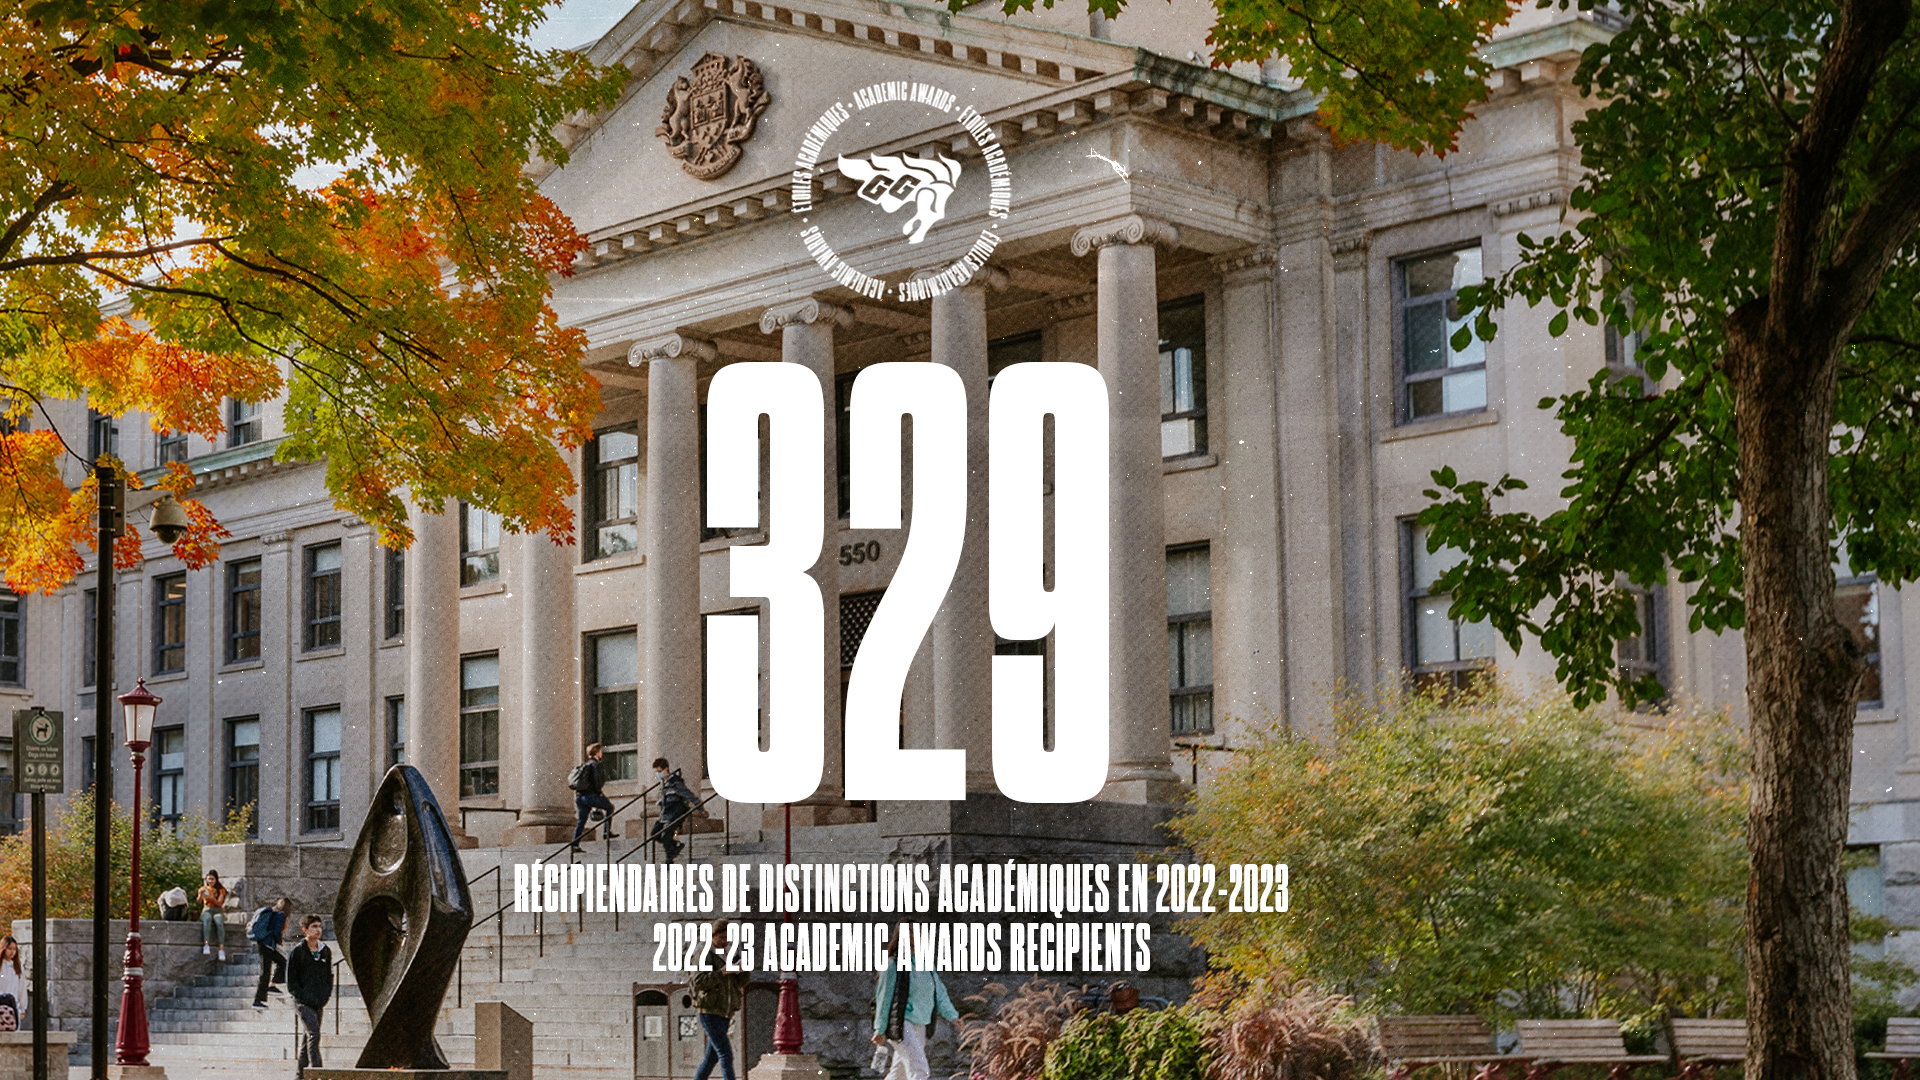 The number 329 is overlaid on a photo of the exterior of uOttawa's Tabaret hall in autumn Thumbnail